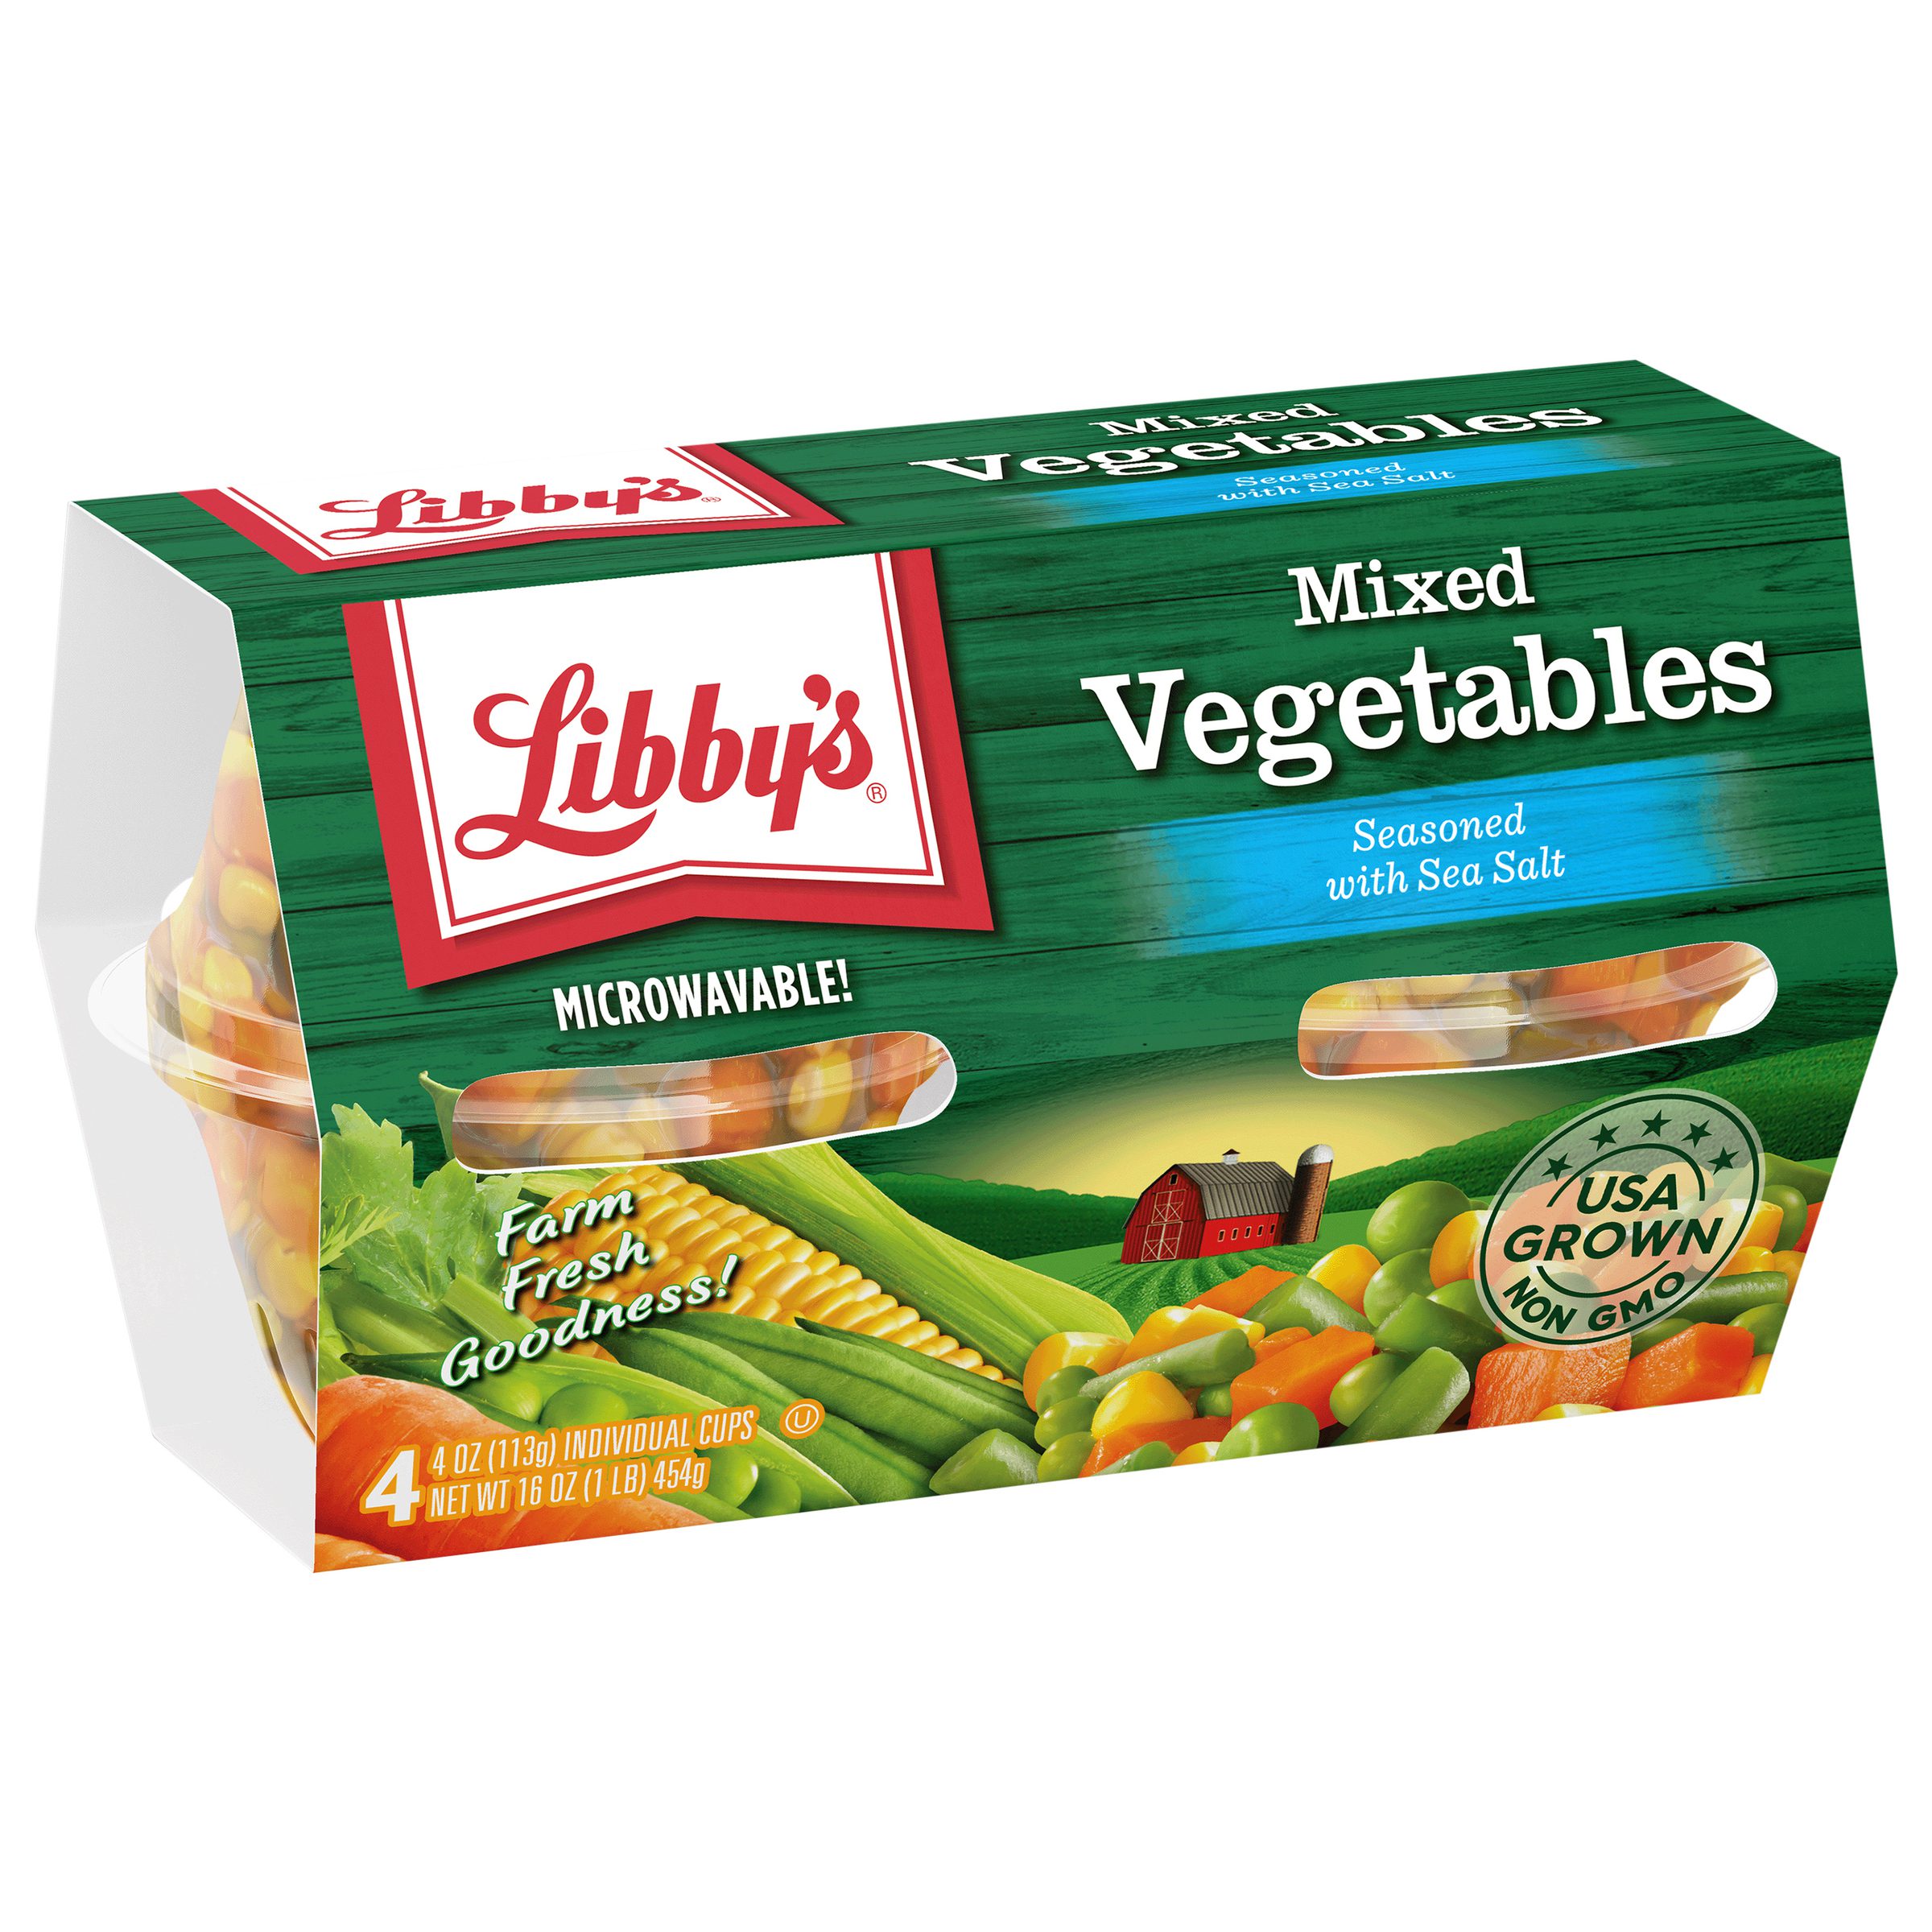 Mixed Vegetables, 4 oz. Cups, 4-Pack